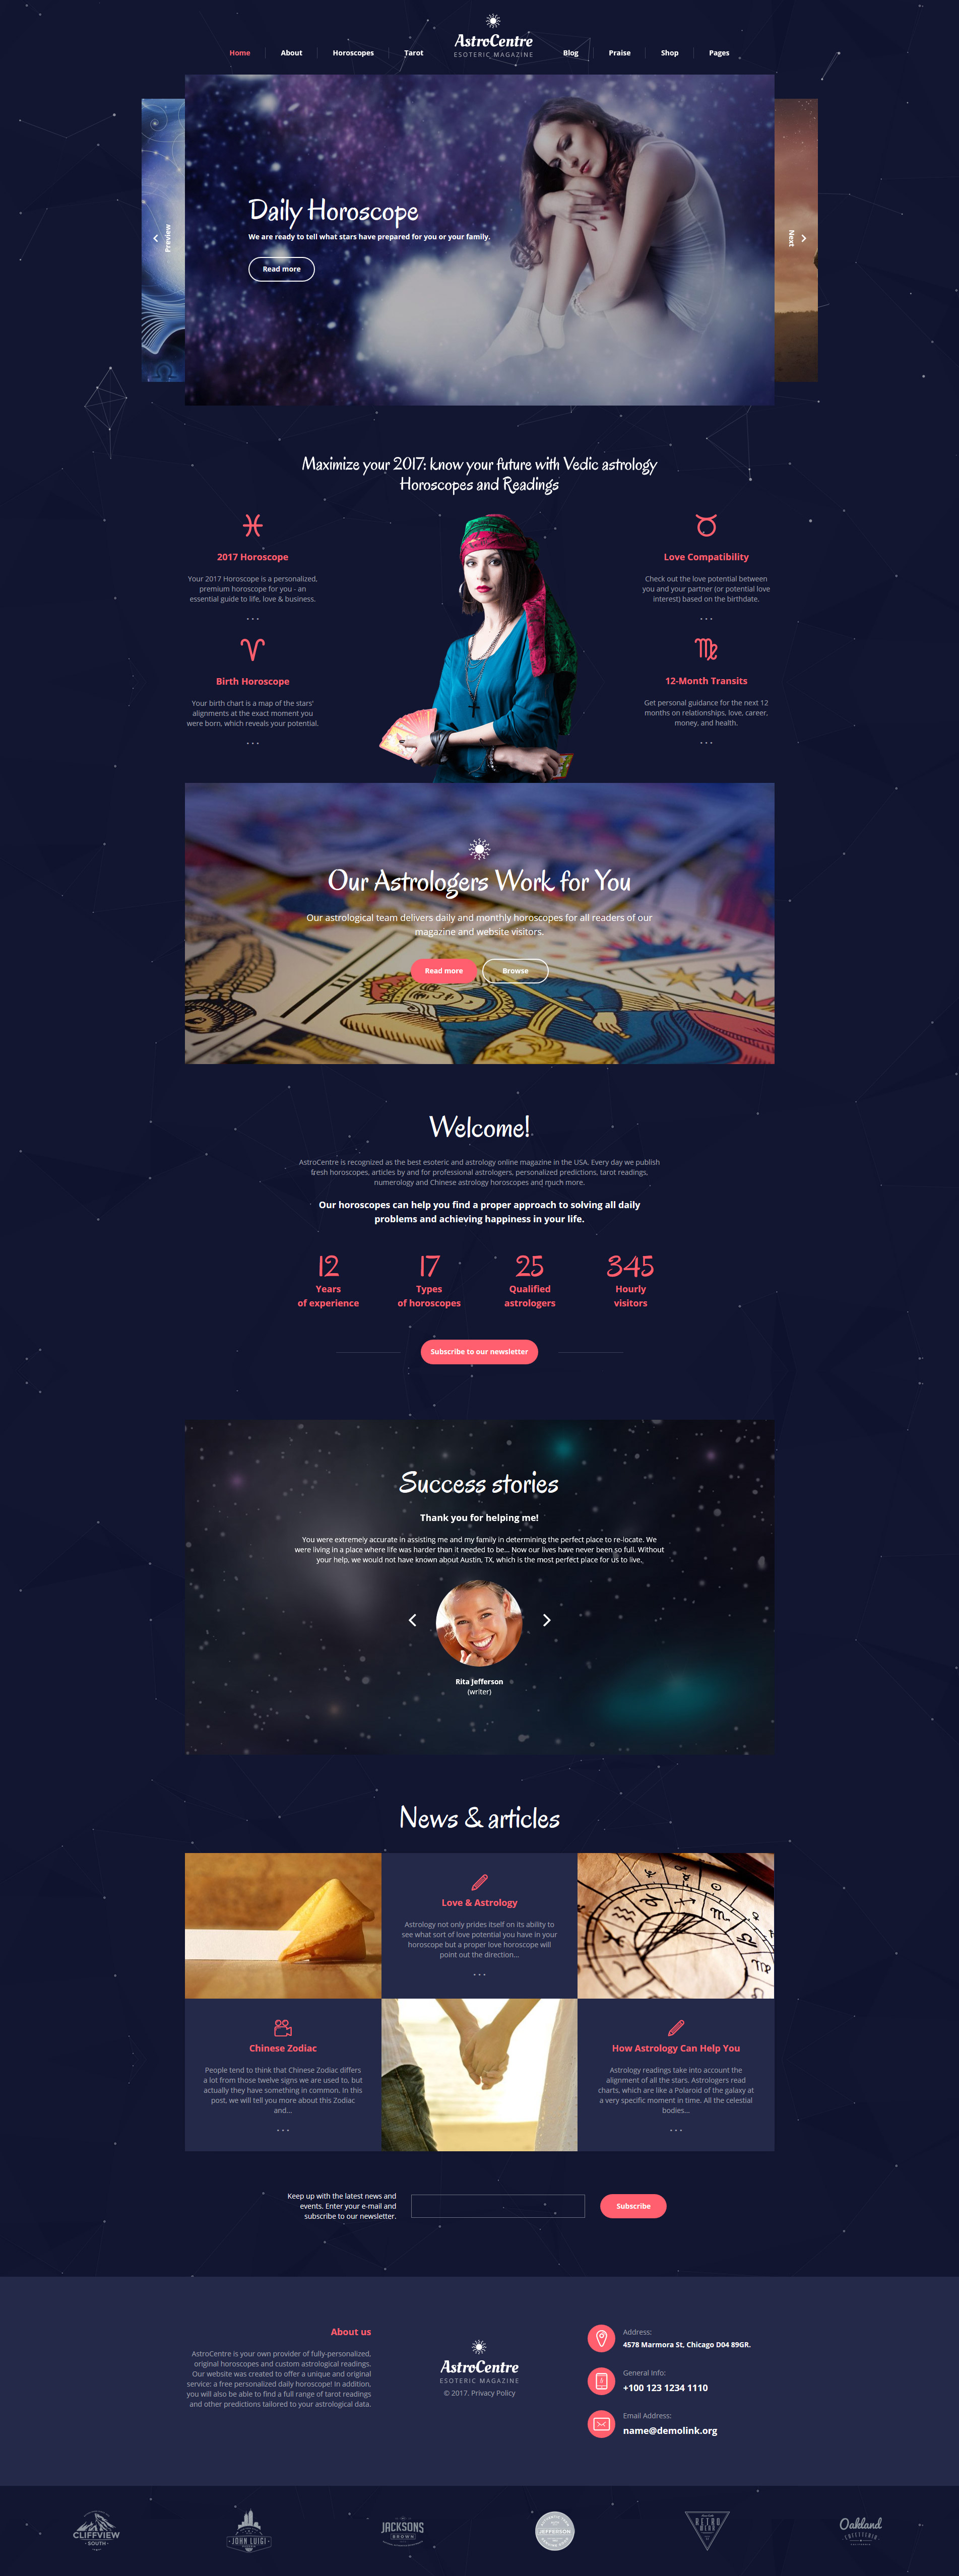 AstroCentre - Astrology Multipage Website Template